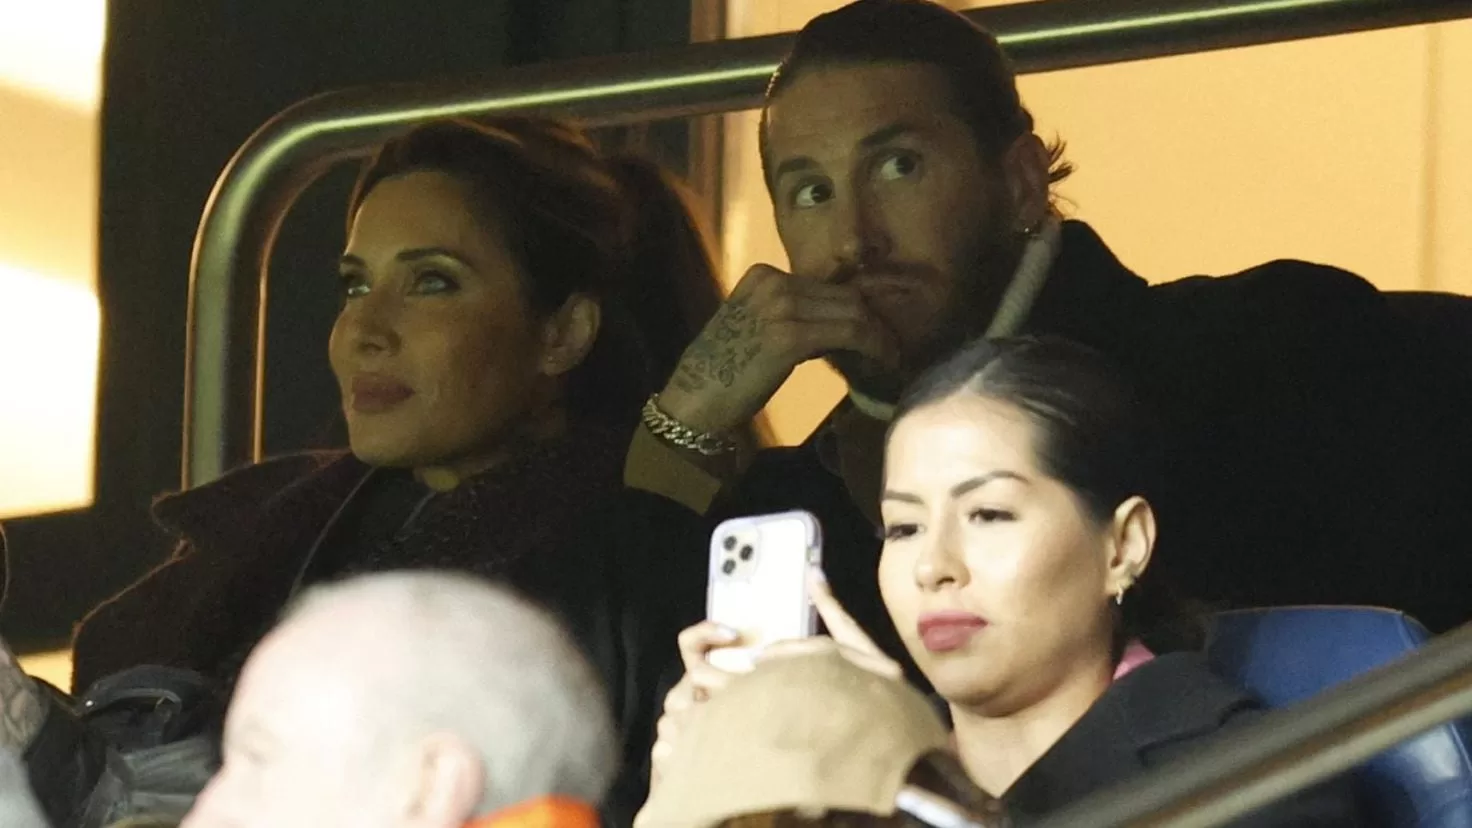 Sergio Ramos' Christmas without Pilar Rubio: I don't know what's happening to me...
